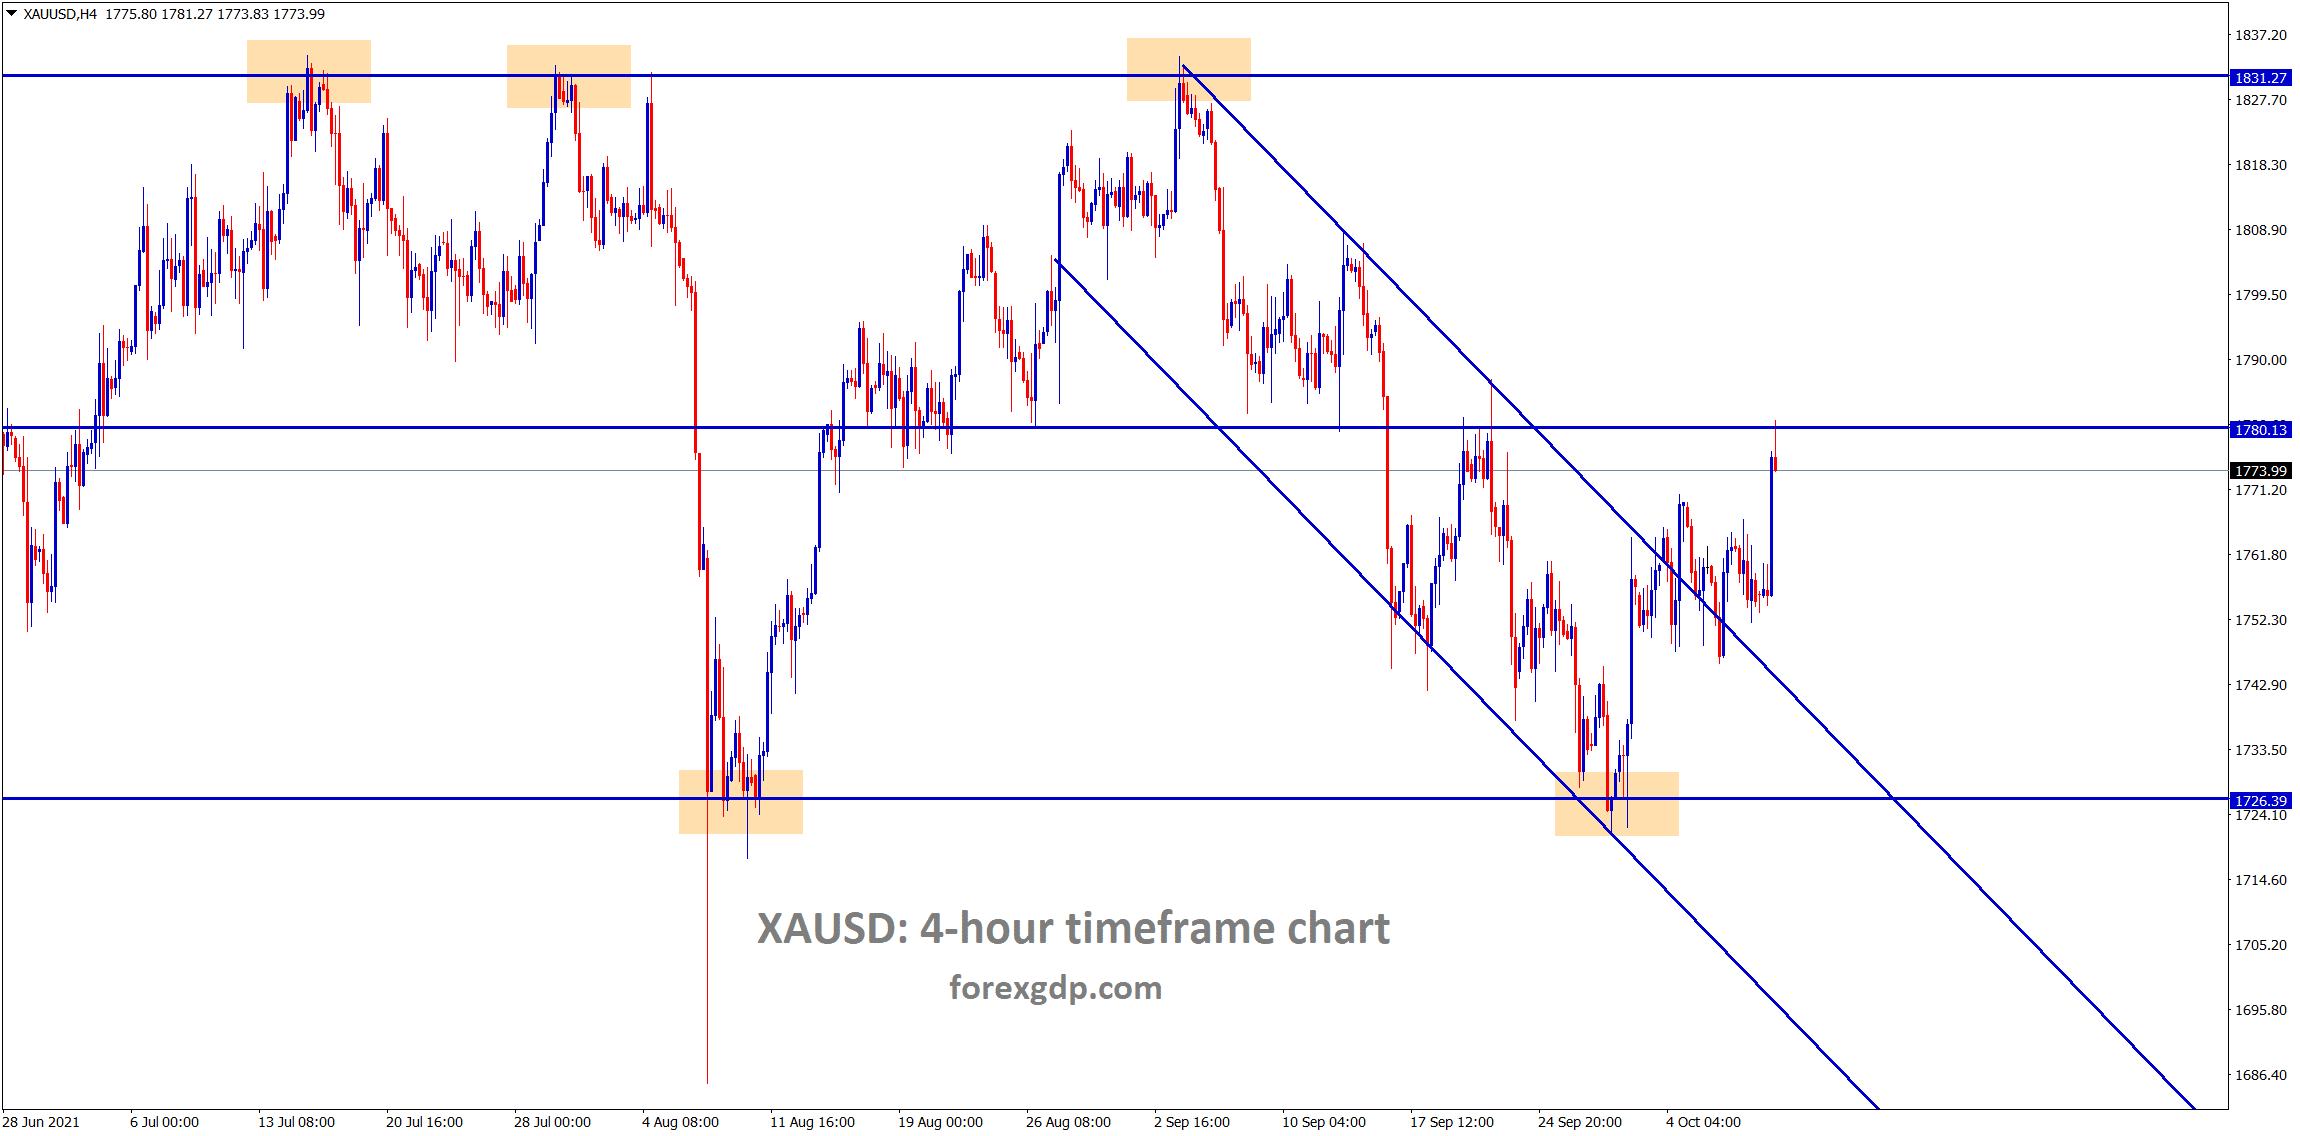 Gold XAUUSD has broken the top of the descending channel and the consolidation zone now the market has reached the horizontal resistance area